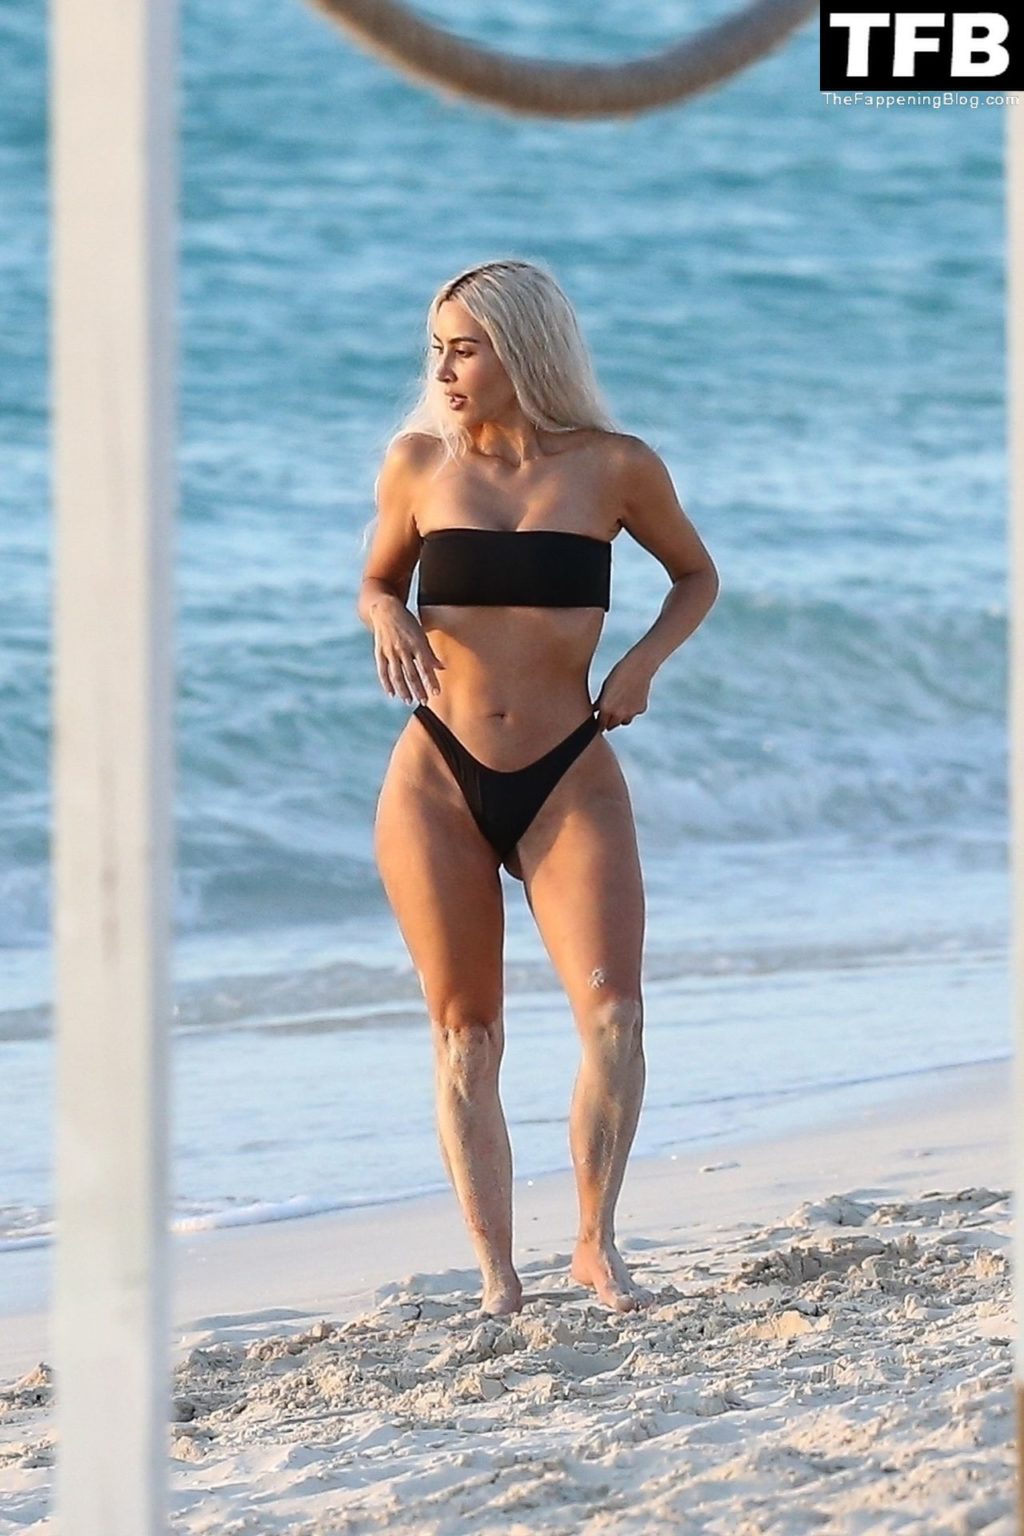 Kim Kardashian Enjoys a Sweet Moment on the Beach During a Family Vacation to Turks and Caicos (11 Photos)